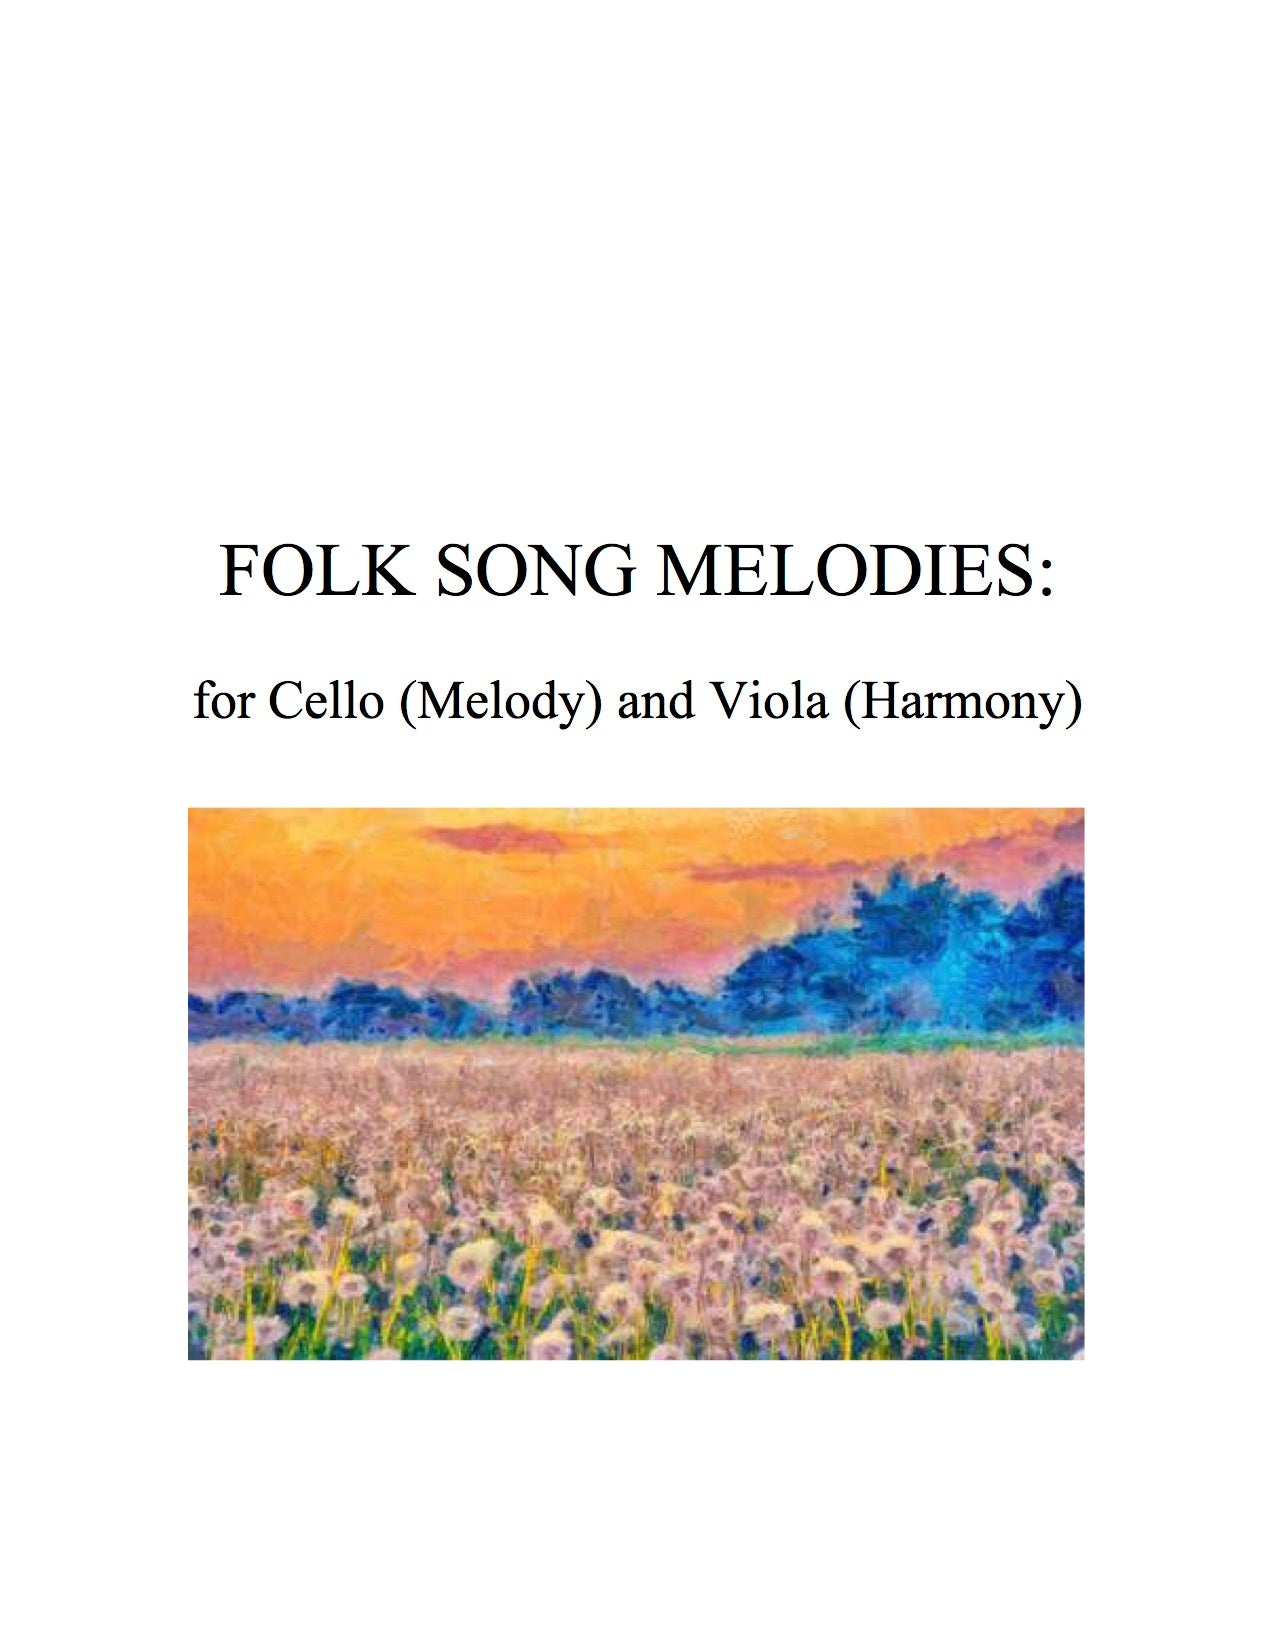 024 - Folk Song Melodies for Cello (Melody) and Viola (Harmony) Twinkle - Etude